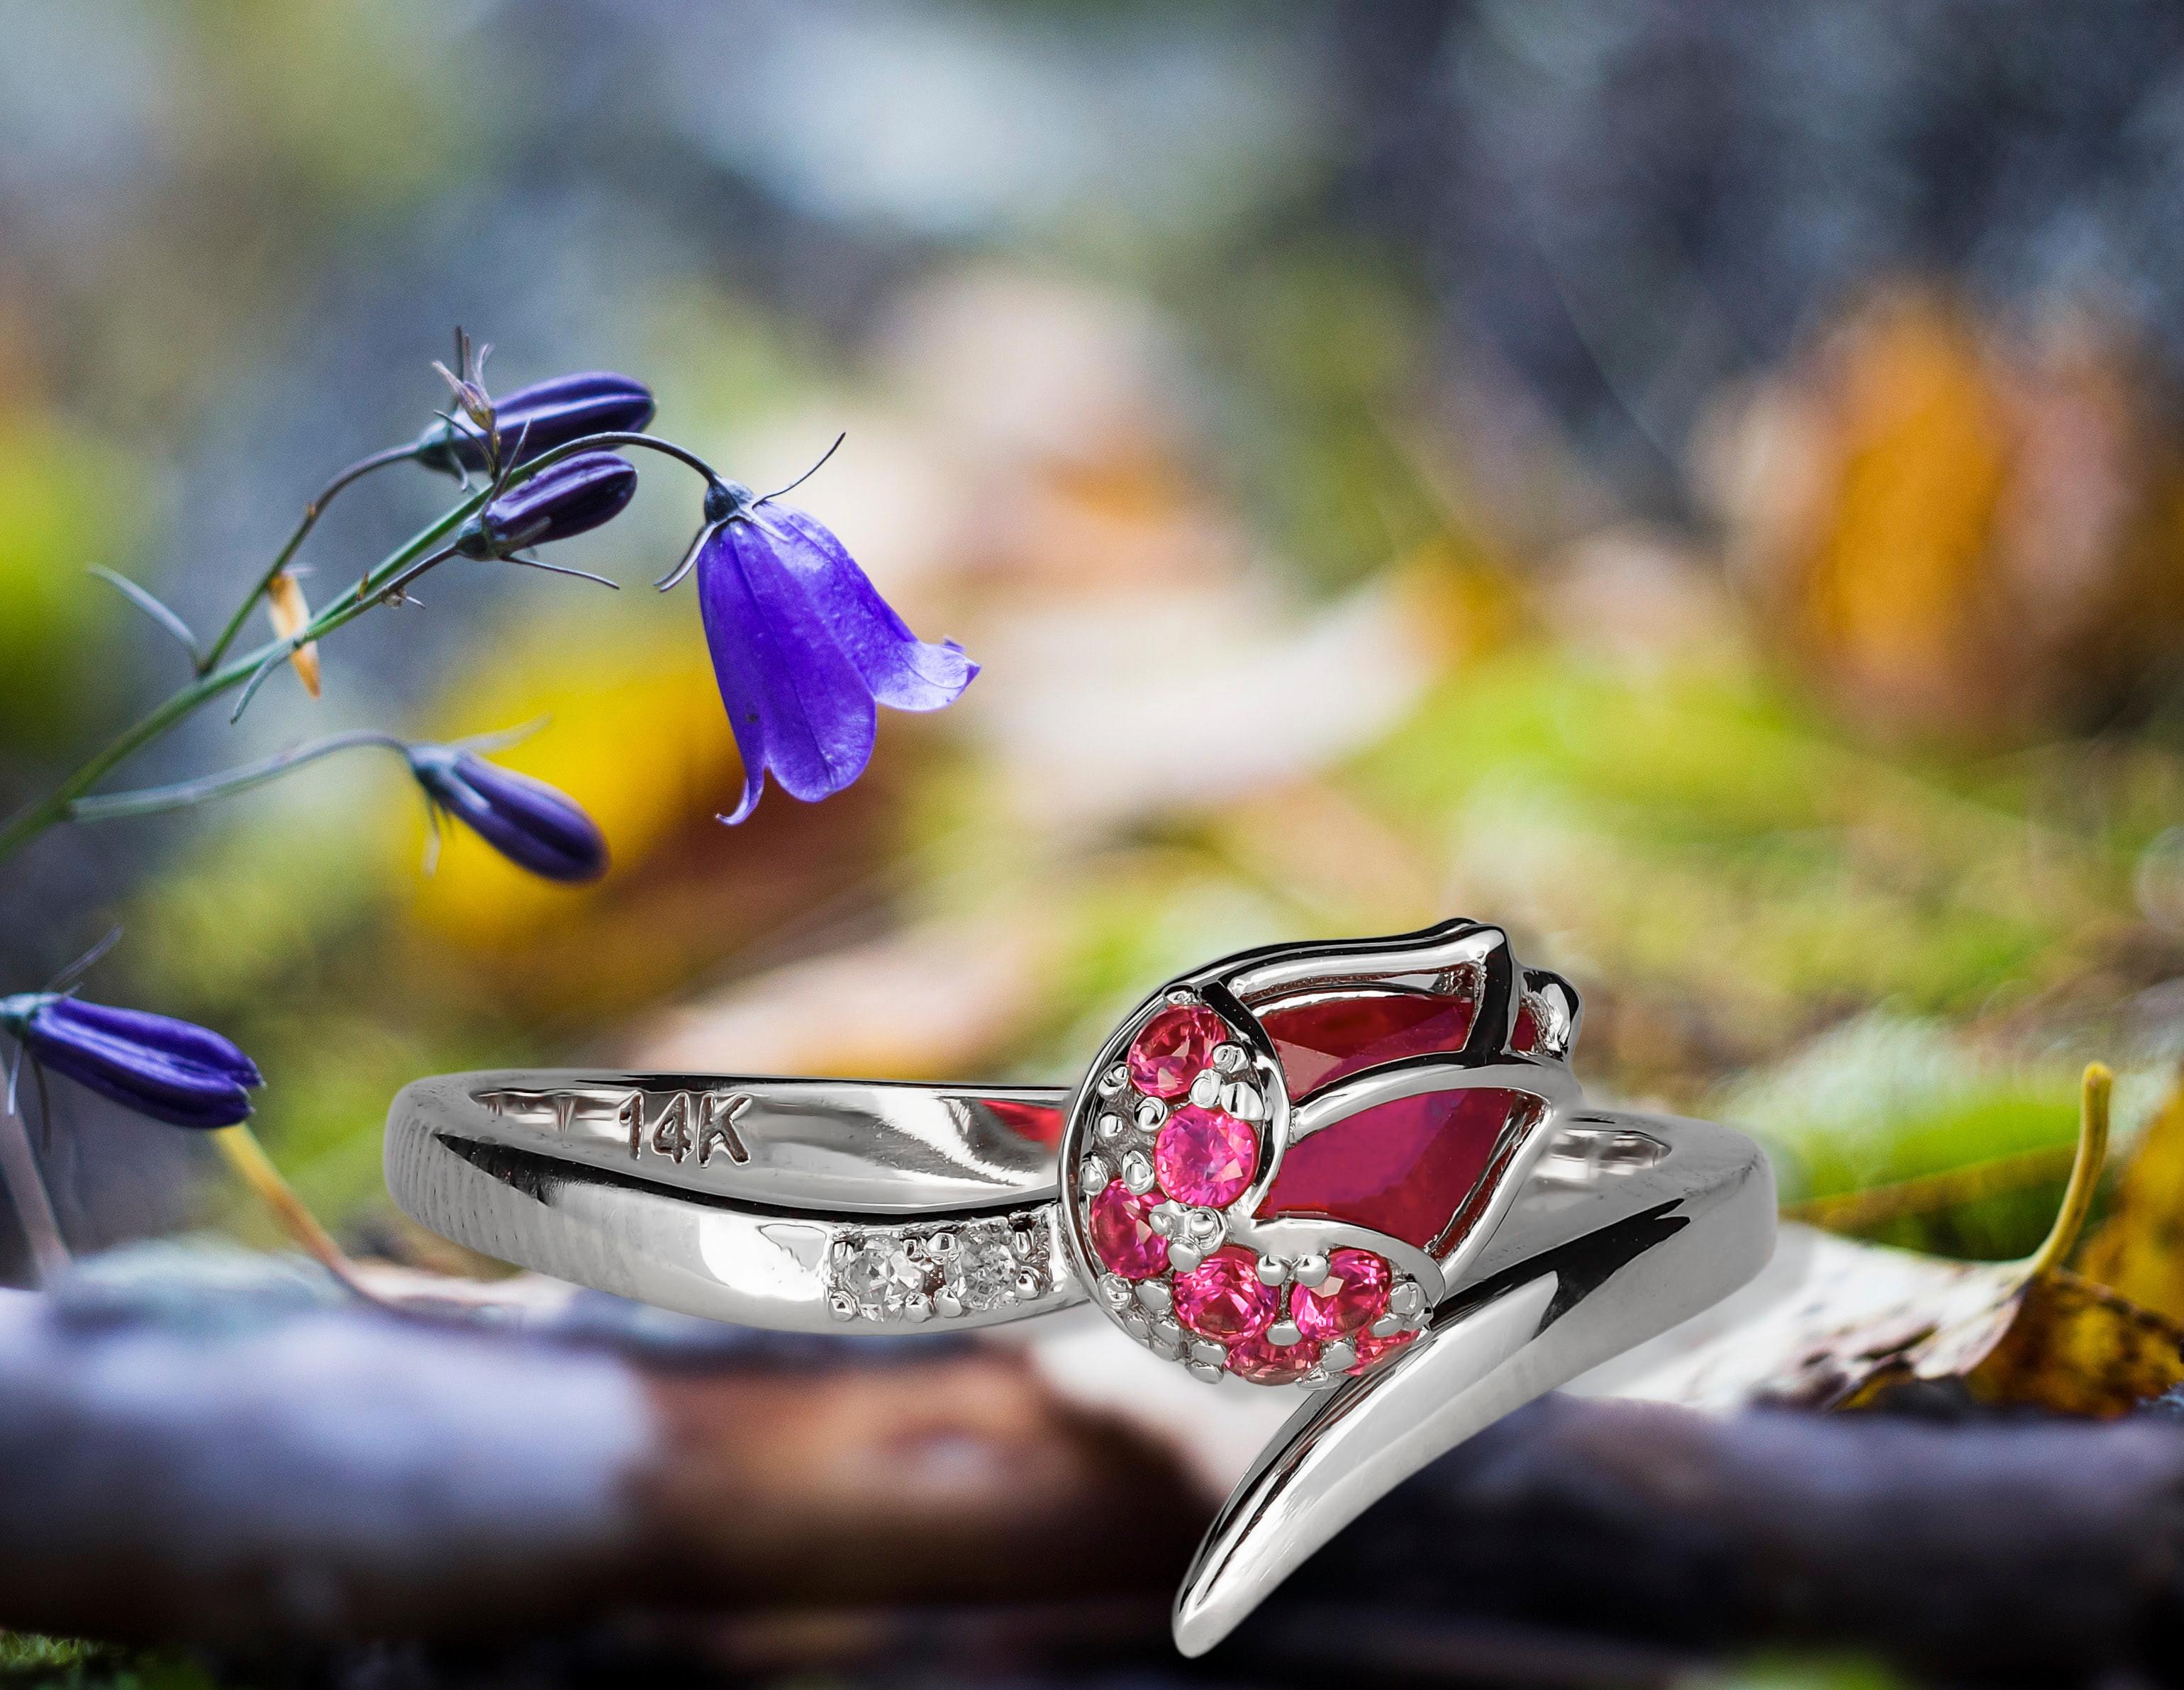 For Sale:  14 karat Gold Ring with Ruby. Gold tulip ring. July birthstone ruby ring 9